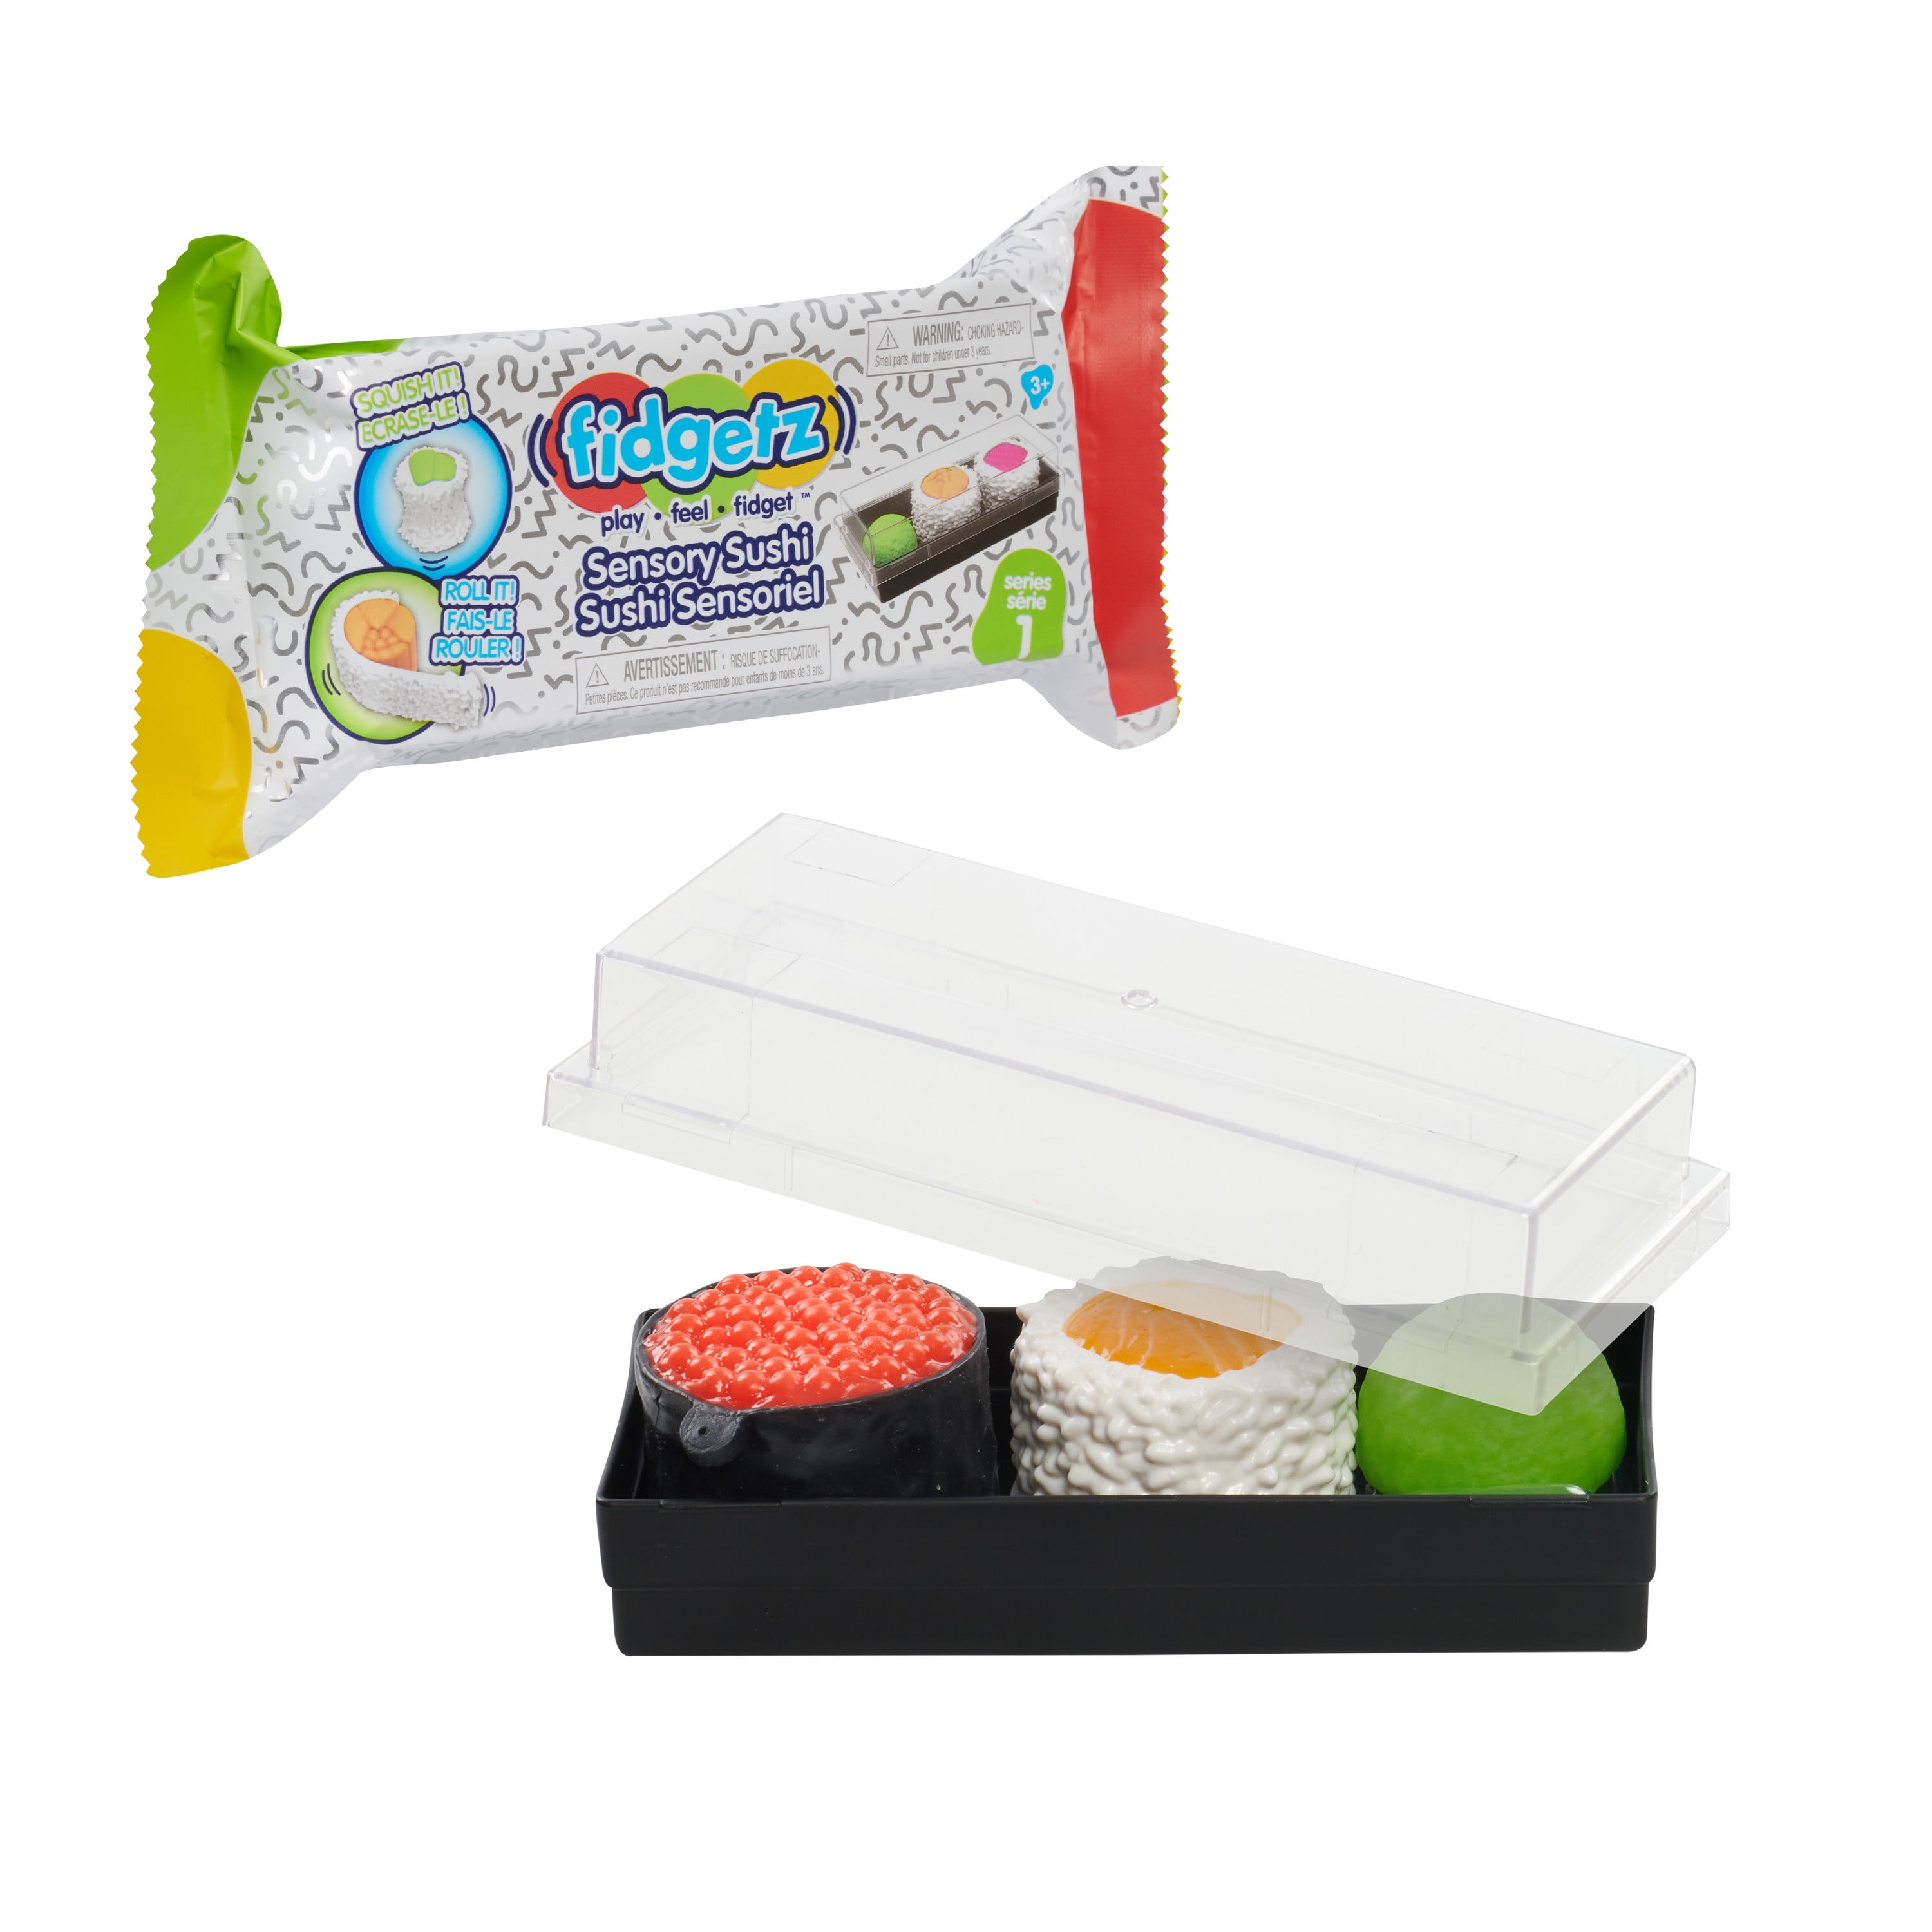 Fidgetz Sensory Sushi, Sold Separately, Styles May Vary, Squishy and Stretchy Tactile Fidget,  Kids Toys for Ages 3 Up, Gifts and Presents, Walmart Exclusive